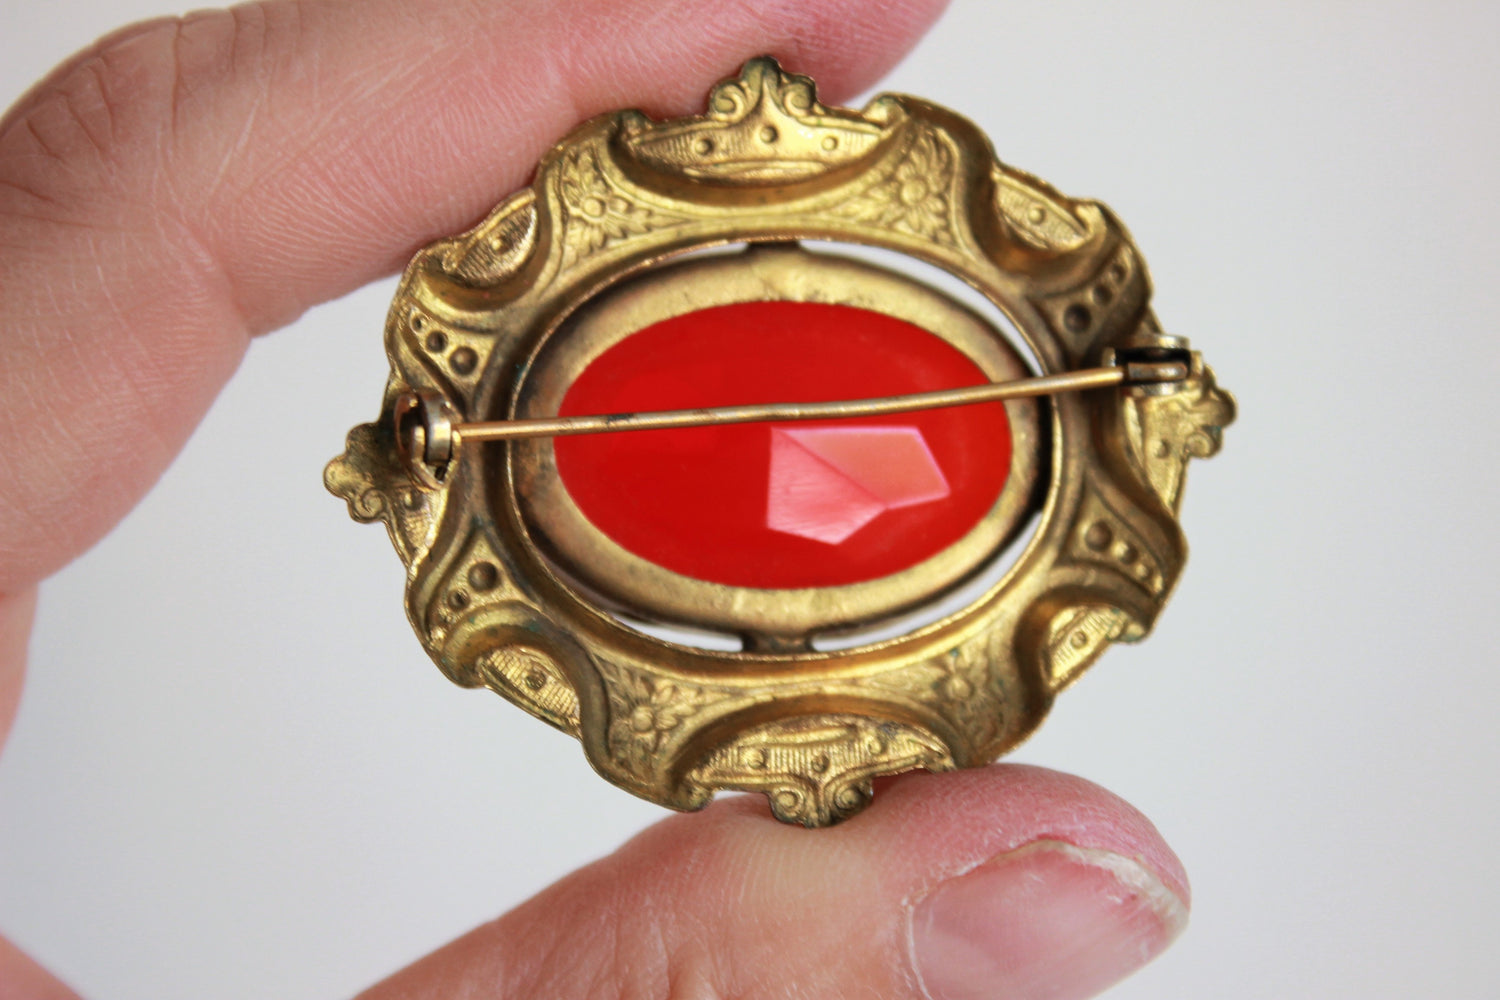 Vintage 1930s 1940s Red Glass Brooch